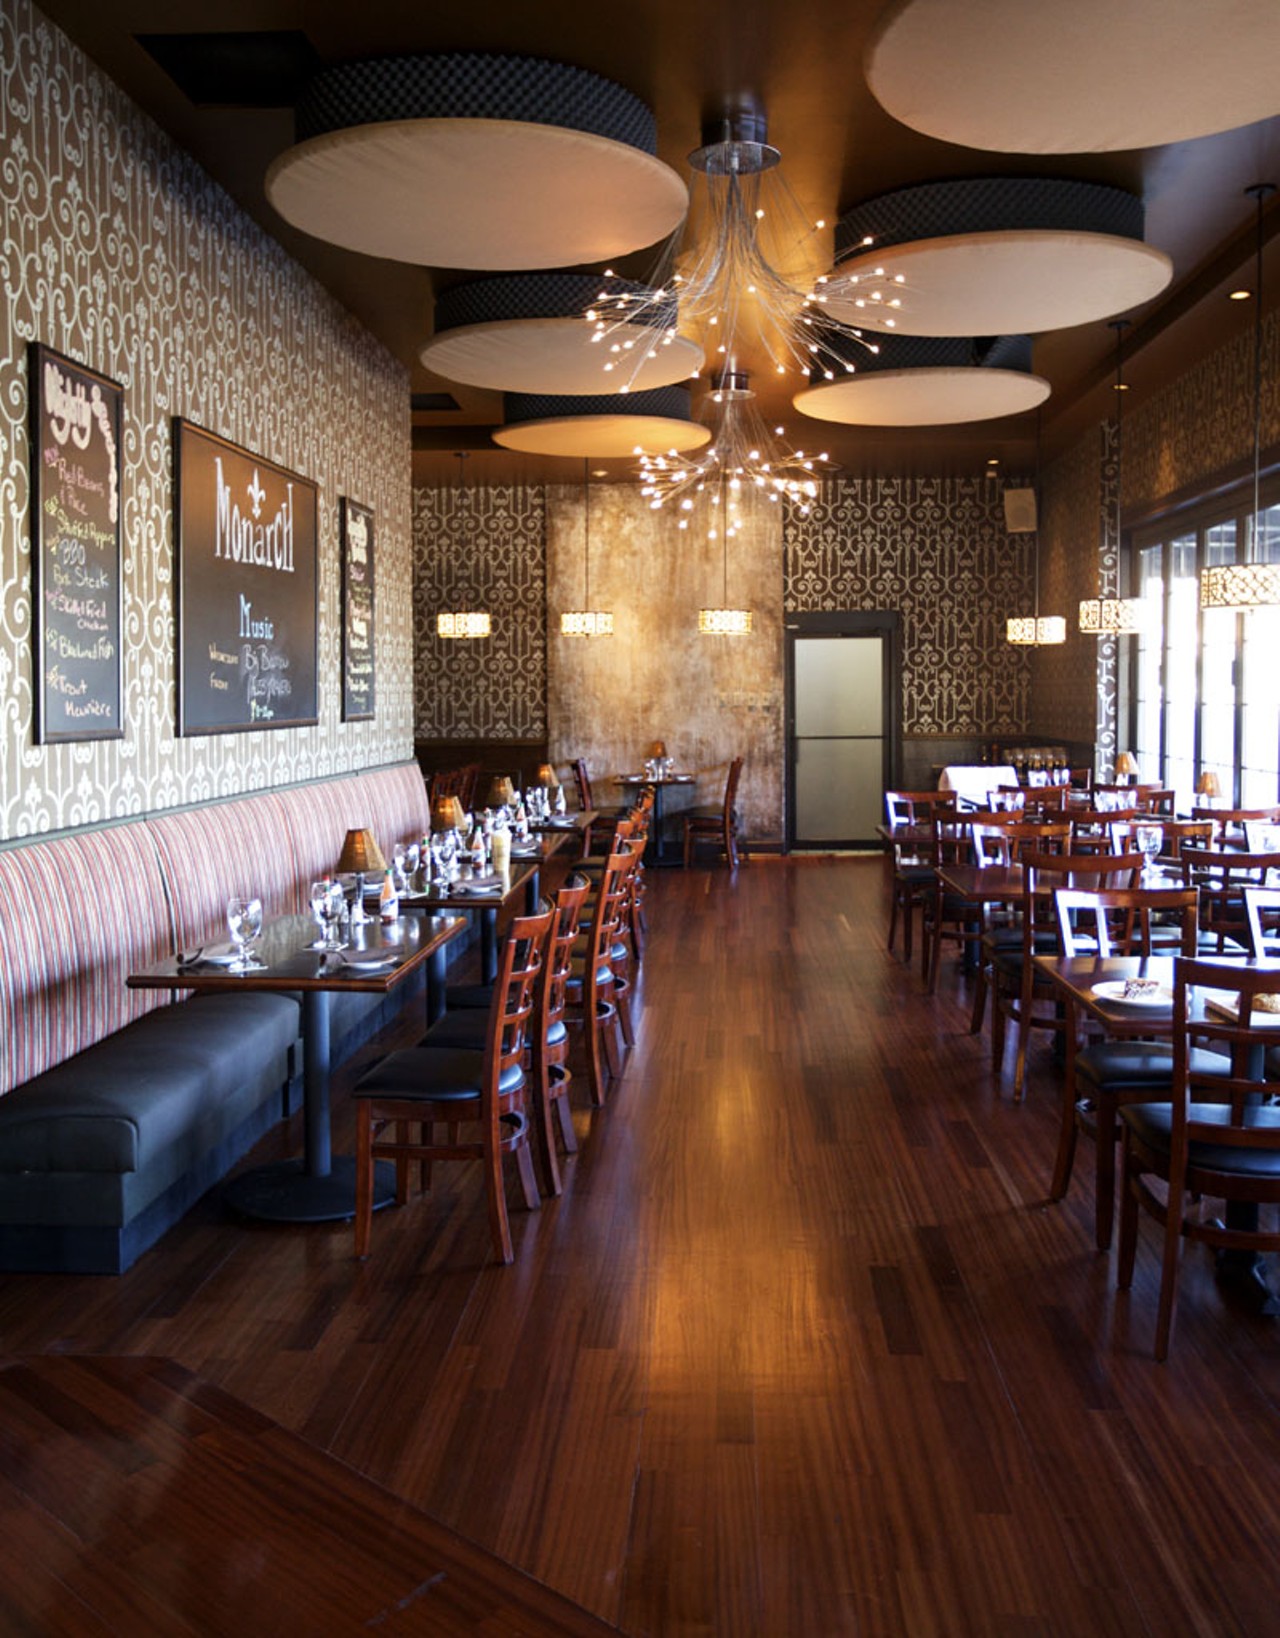 The Southern Bistro at Monarch. Closed this past summer for renovation, Monarch got a face lift and menu change with design by co-owner Jeff Orbin and menu by Executive Chef Josh Galliano.